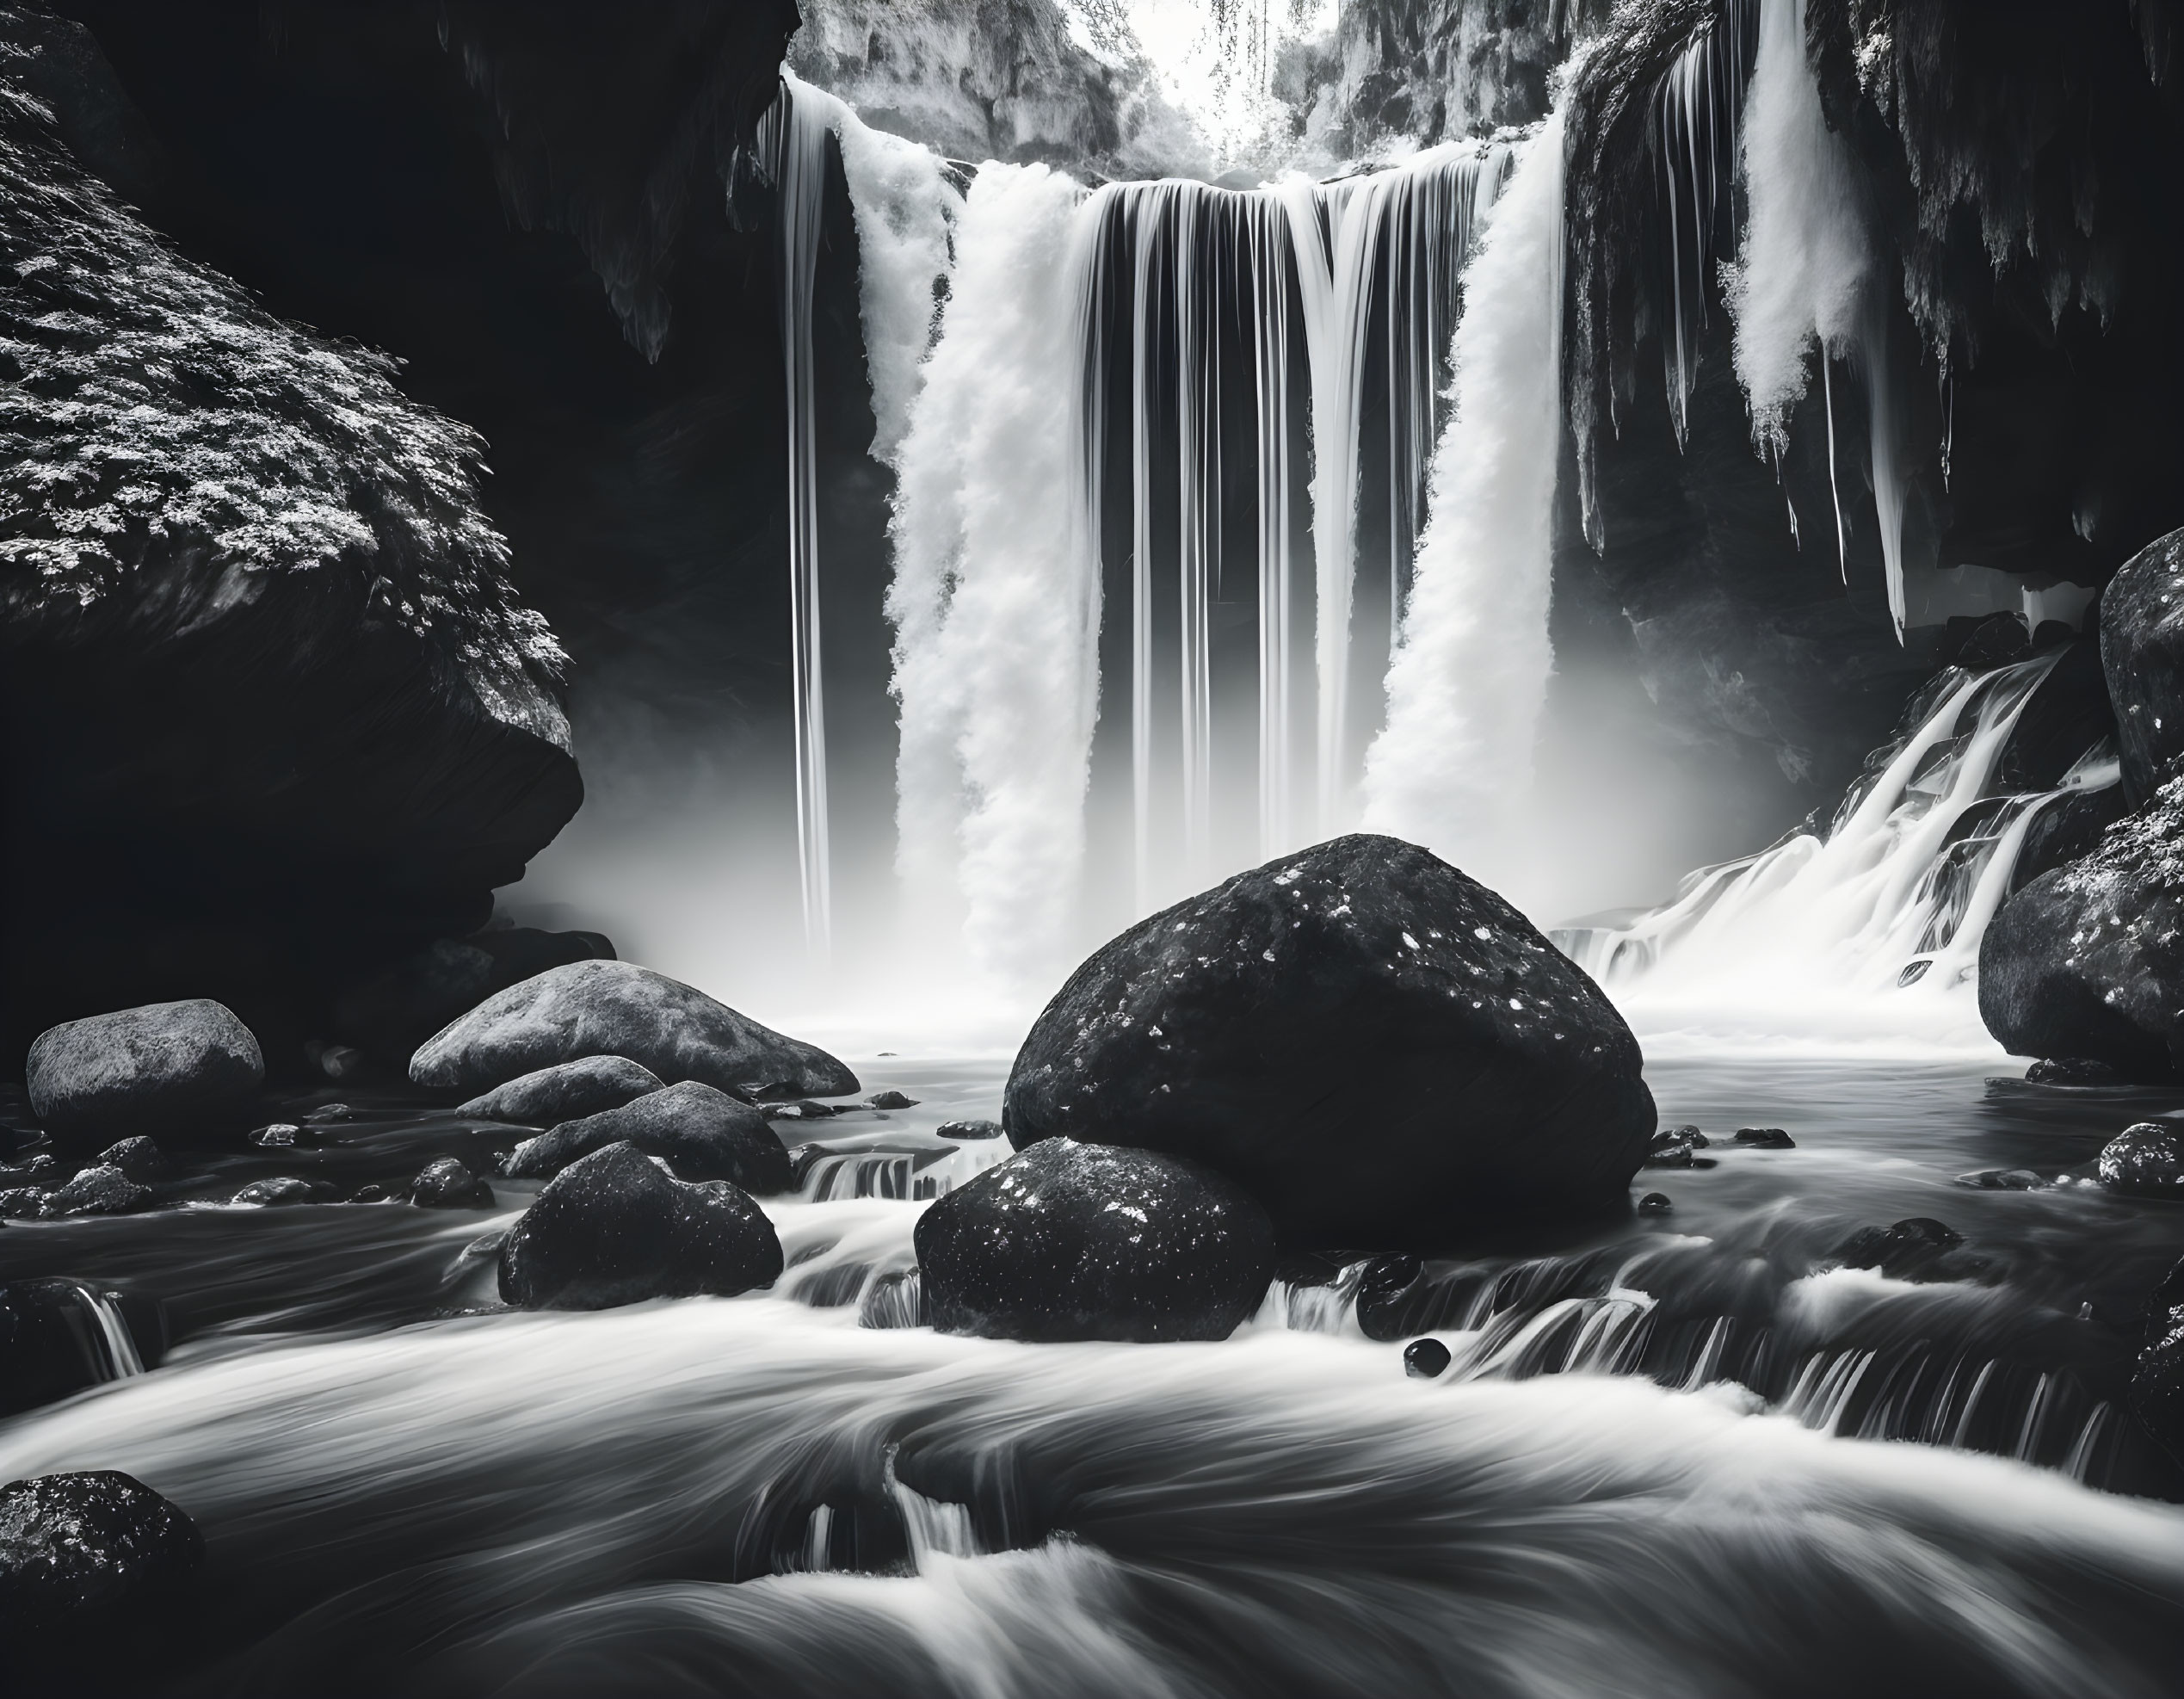 Majestic monochrome waterfall scene with icy rocks and hanging icicles